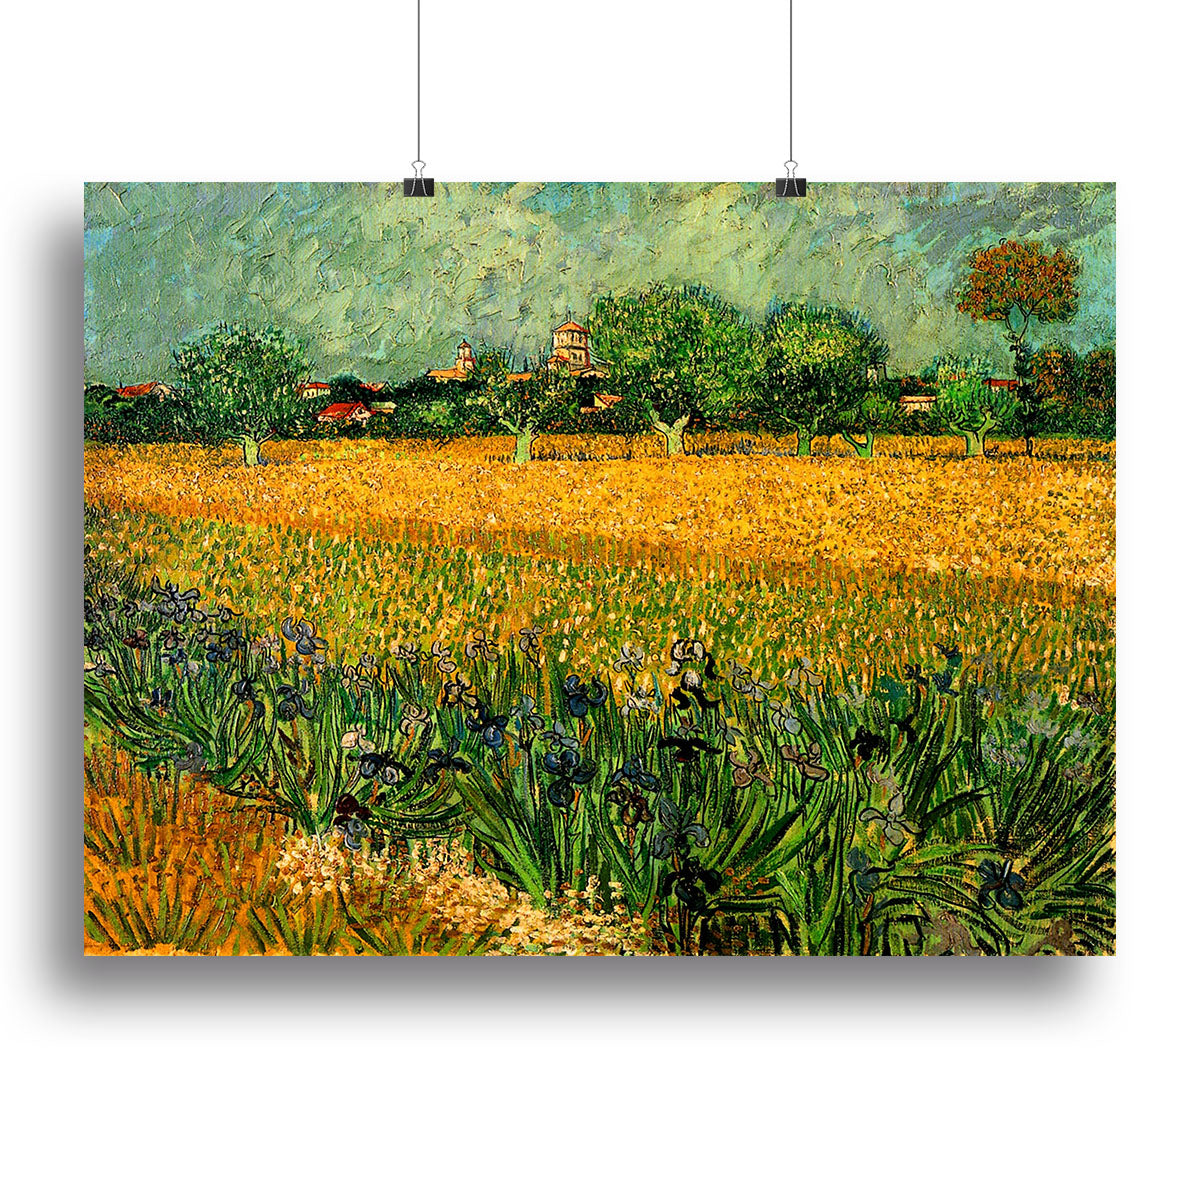 View of Arles with Irises in the Foreground by Van Gogh Canvas Print or Poster - Canvas Art Rocks - 2